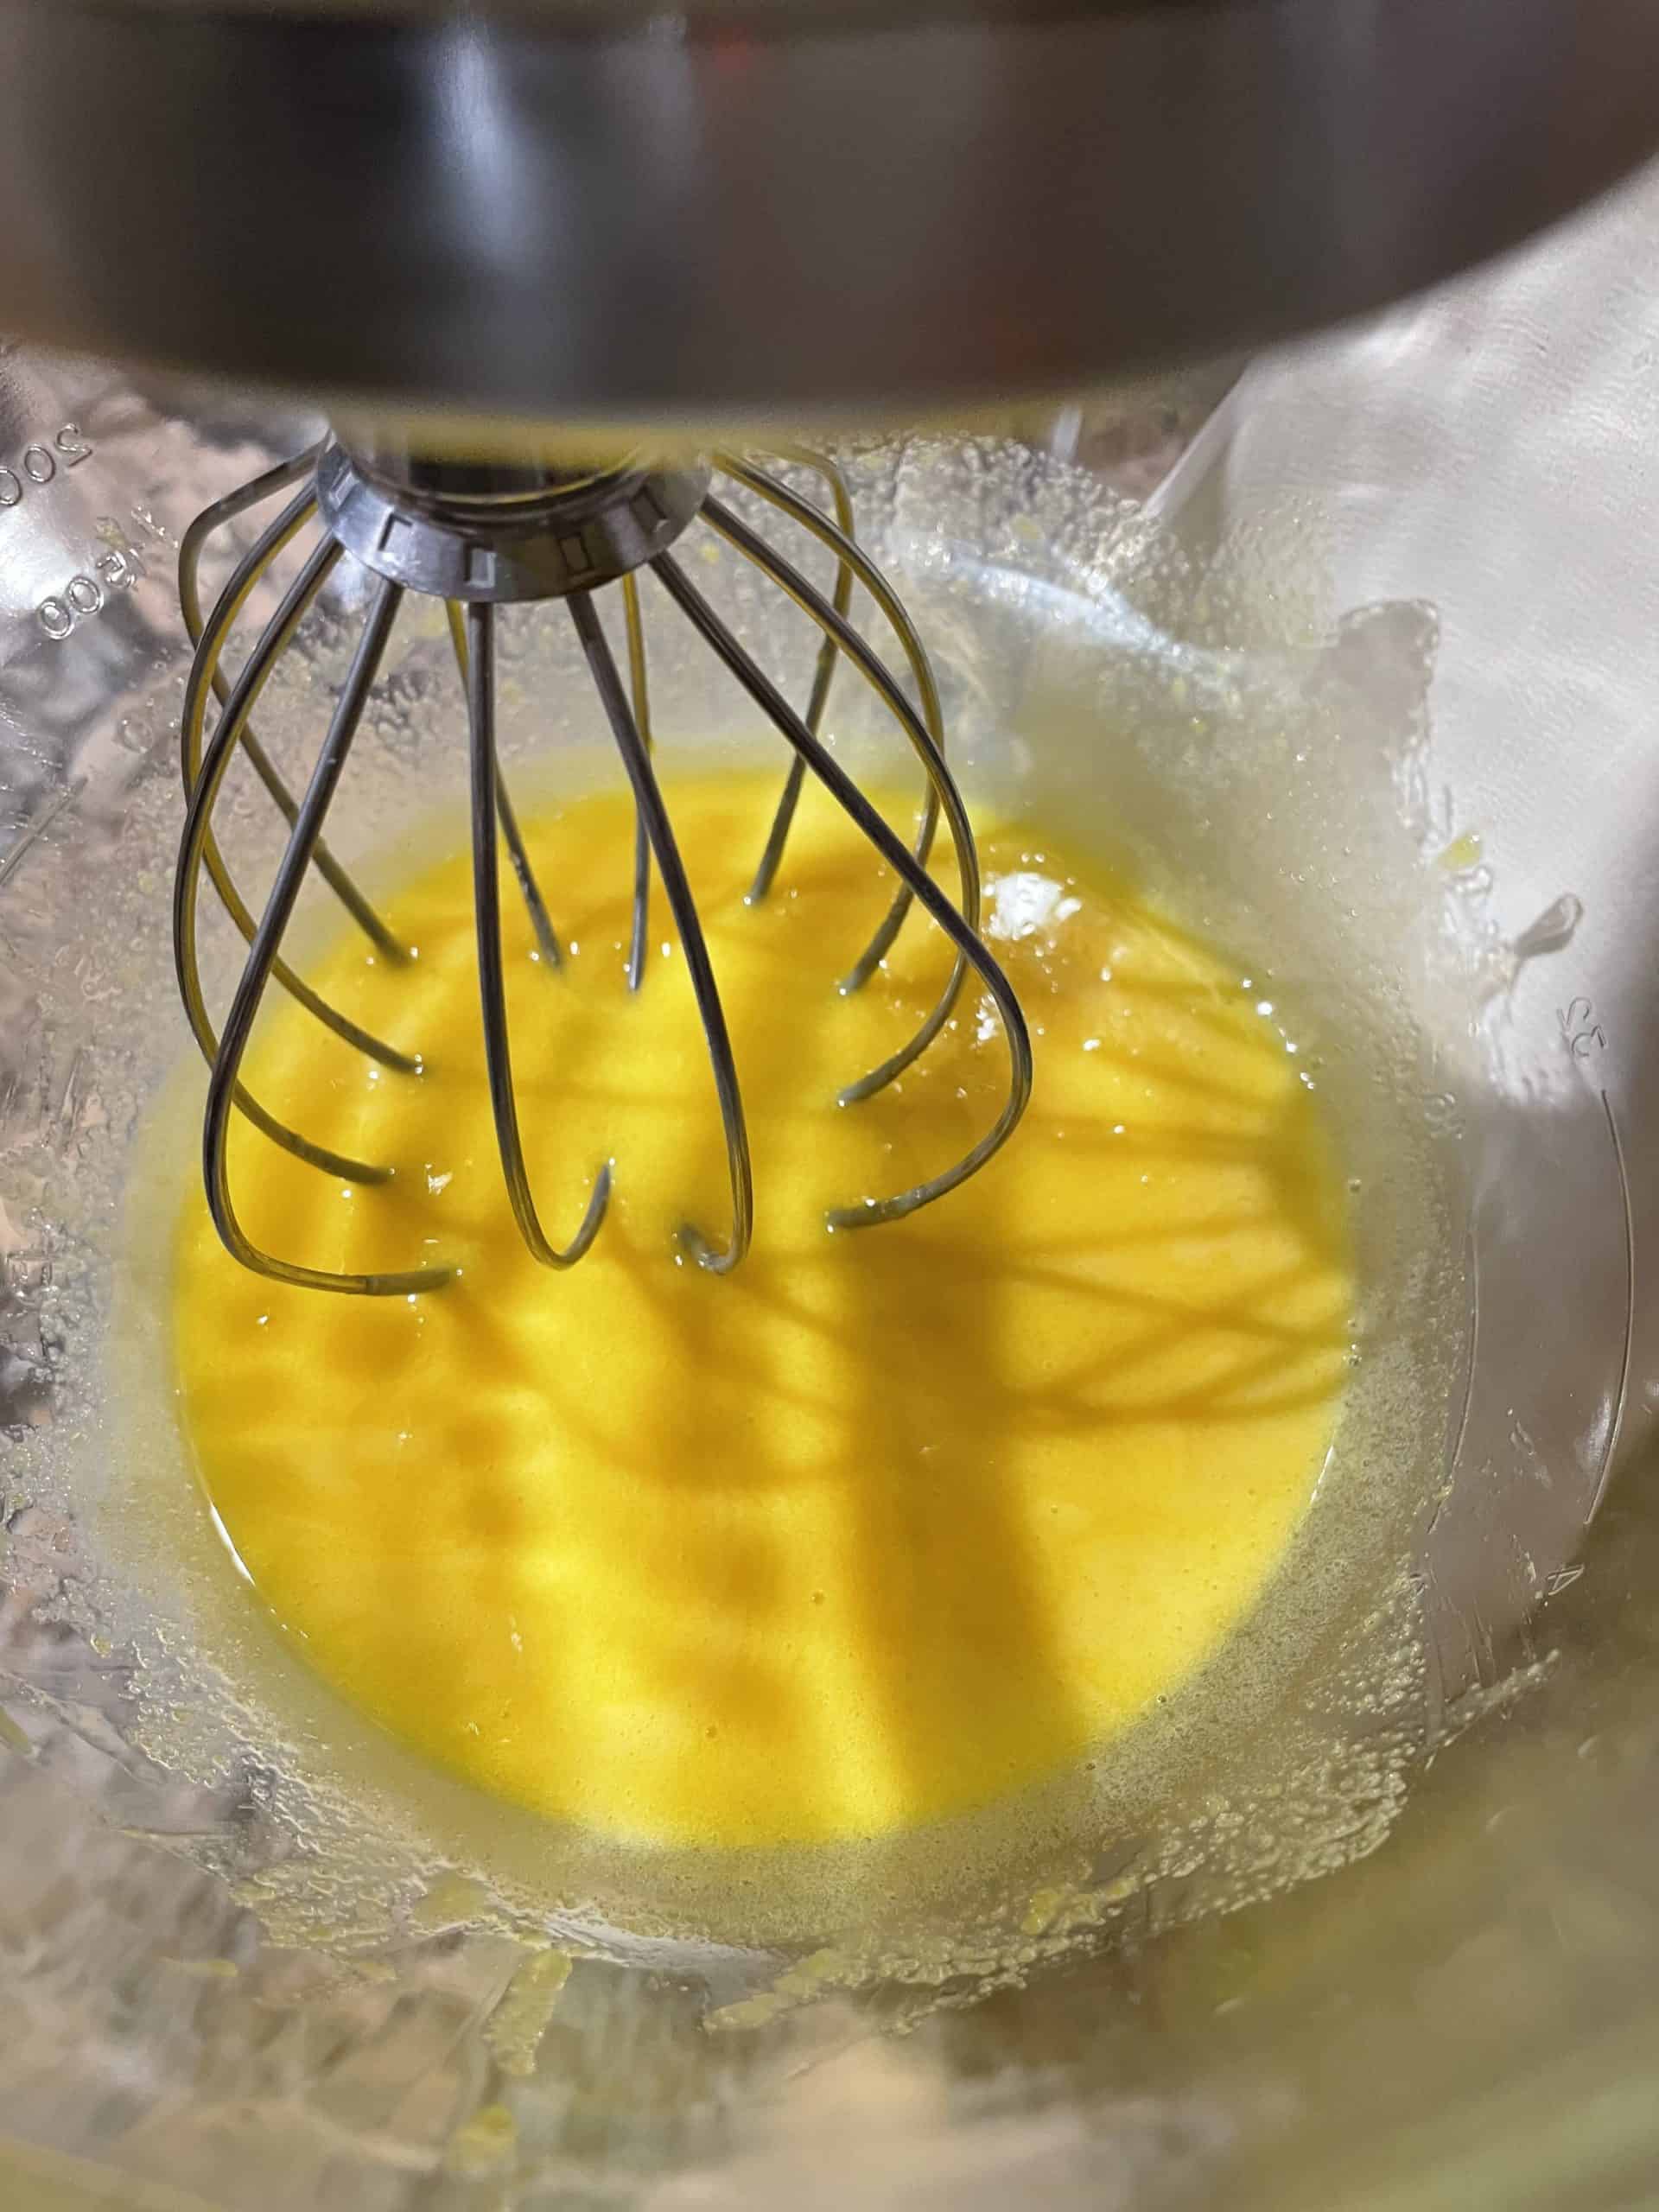 Whipped egg yolks in a mixing bowl.